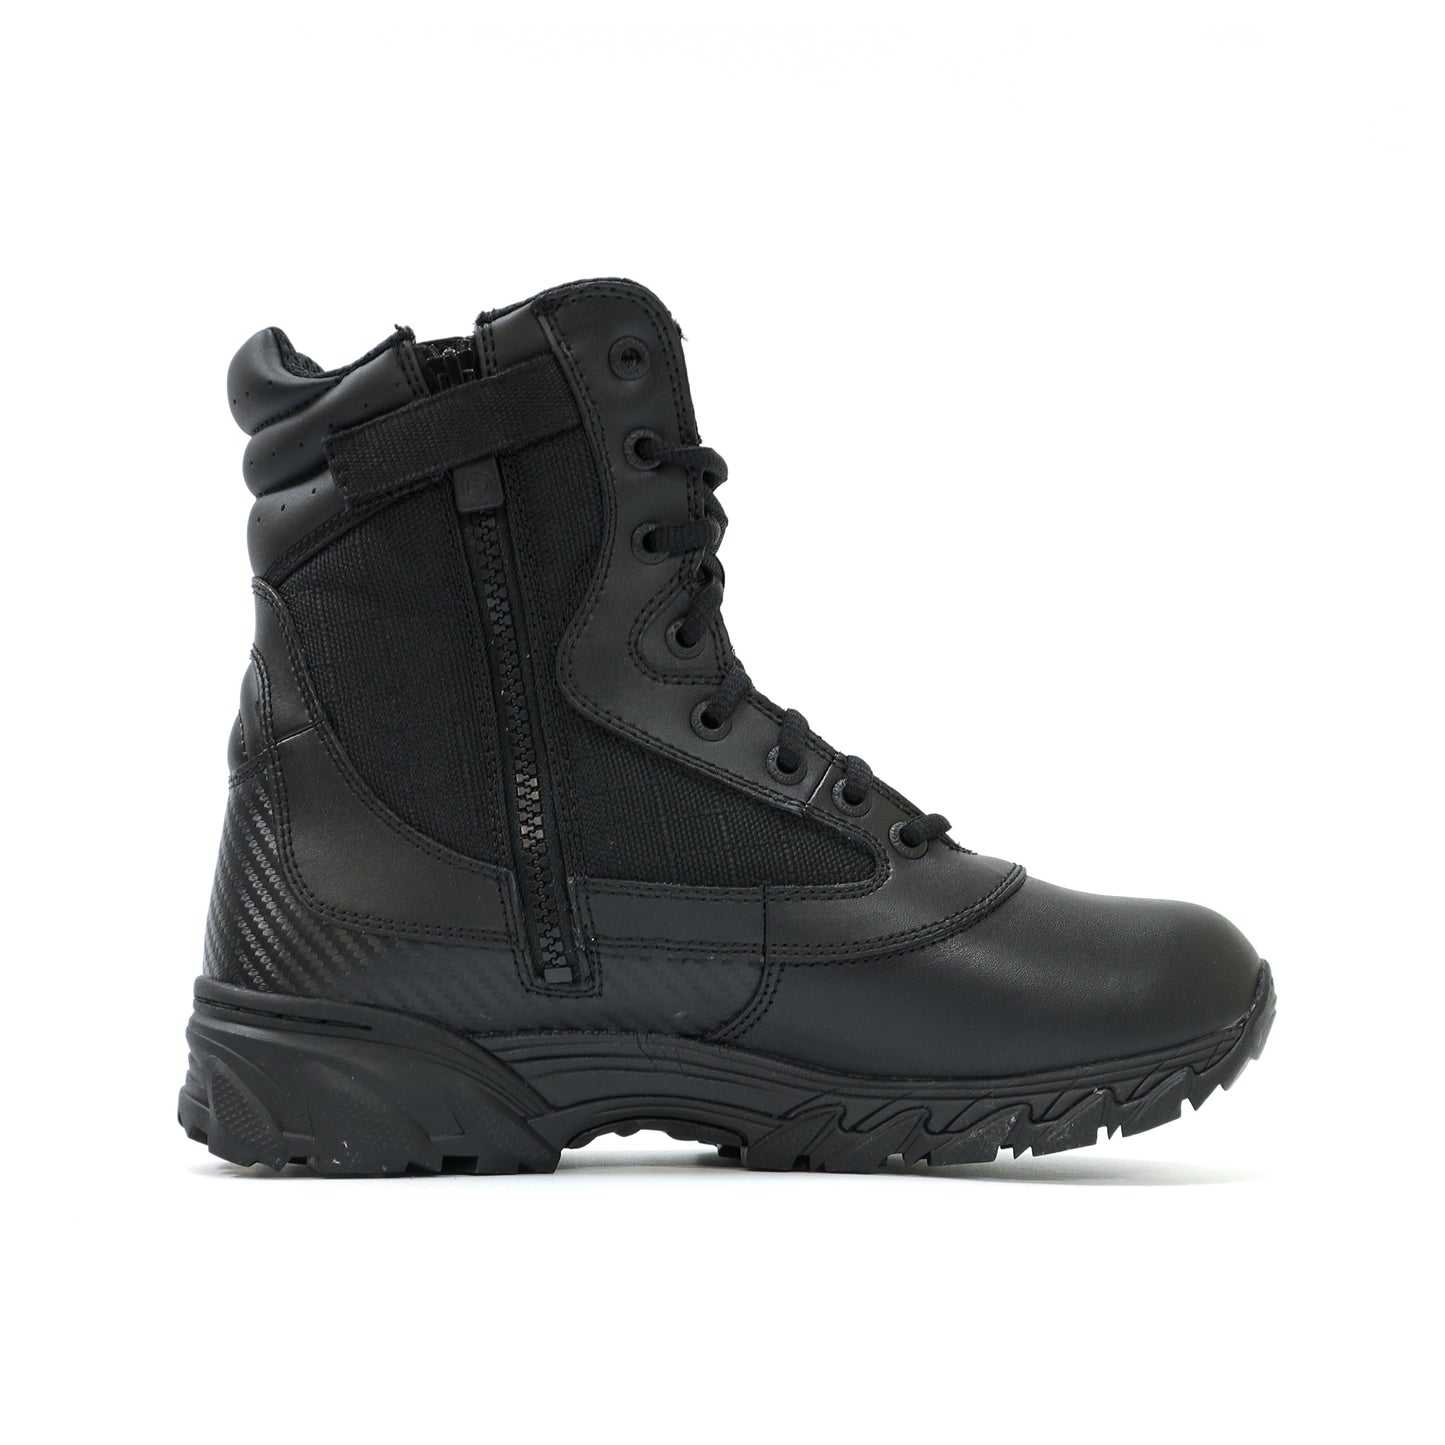 Original S.W.A.T. Chase 9" SZ Tactical Boot